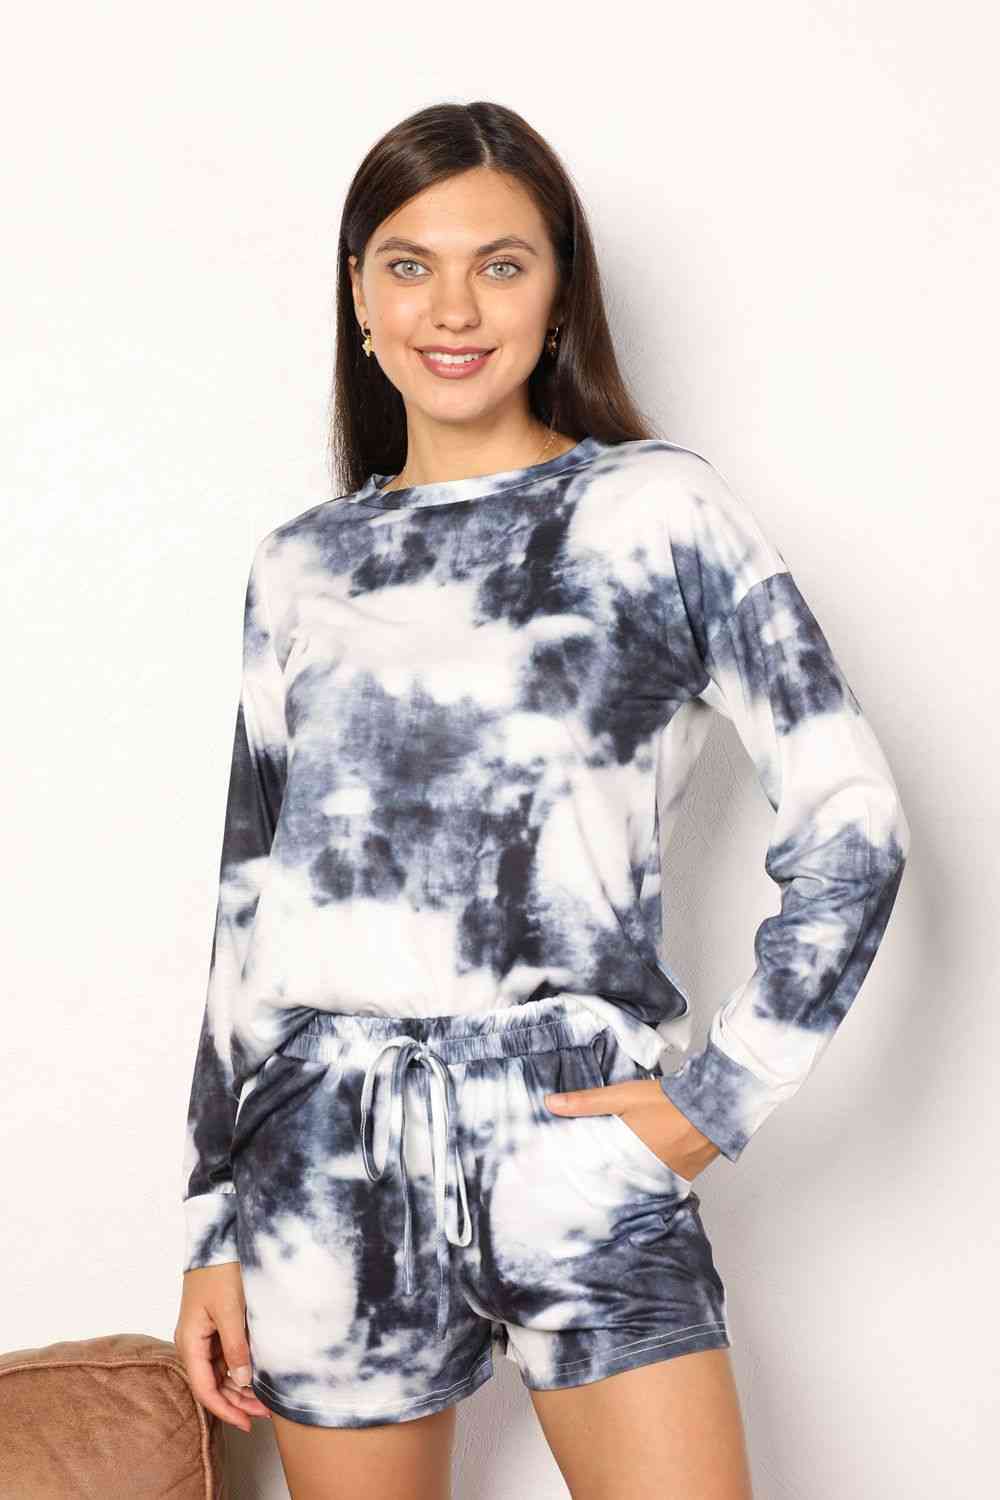 Trendsi Loungewear Gypsy Shore Tie-Dye Round Neck Top and Shorts Lounge Set